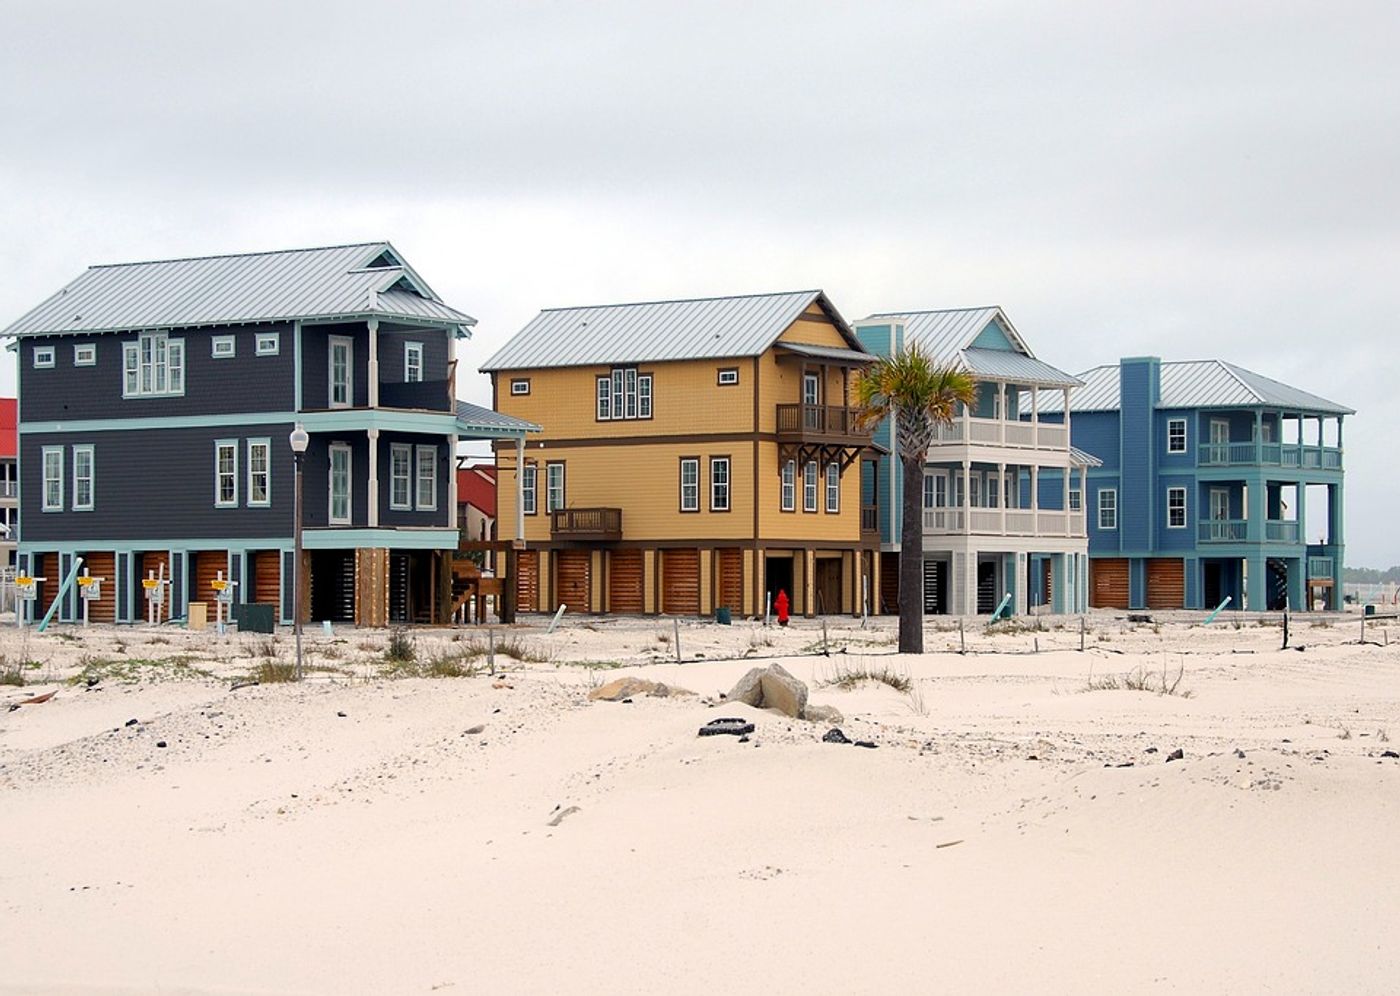 The difference between believing and acting is significant when it comes to coastal homeowners' preparation for climate change. Photo: Pixabay